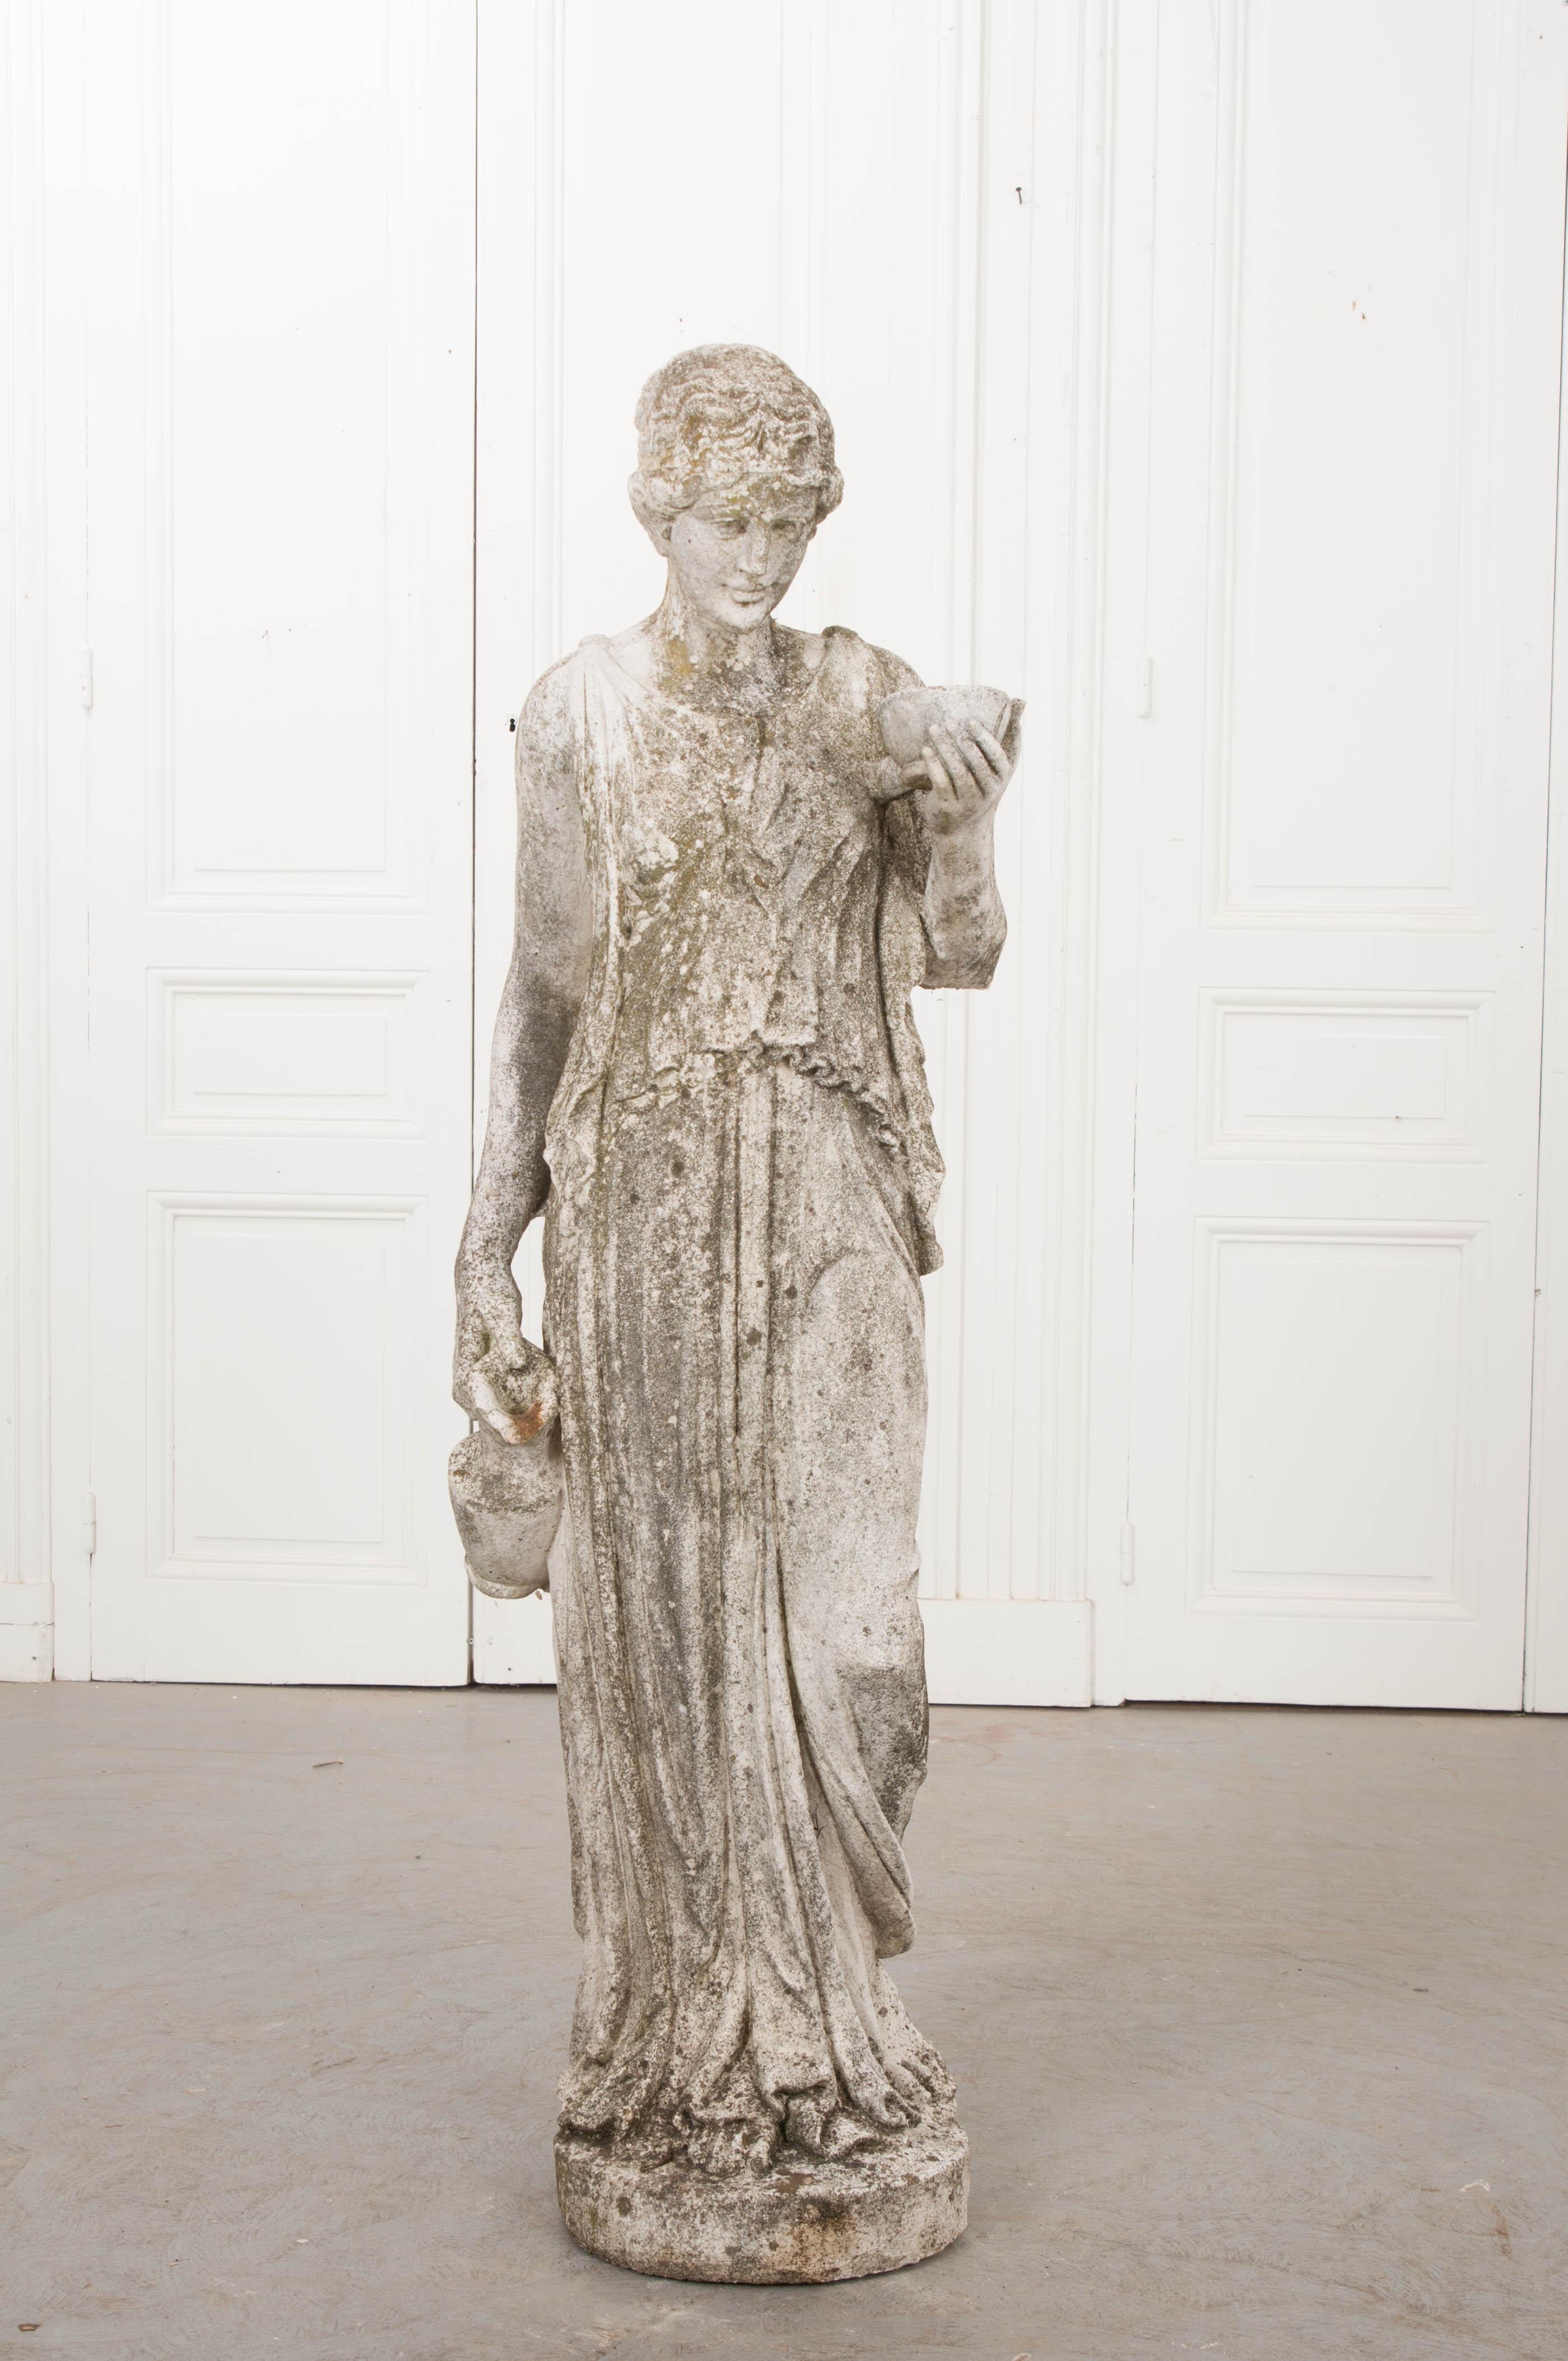 This beautifully patinated carved stone statue of Hebe, the goddess of Youth or the “Prime of Life,” circa 1830s, is from England. Not only for the garden, she would be nothing less than stunning indoors!
  
  